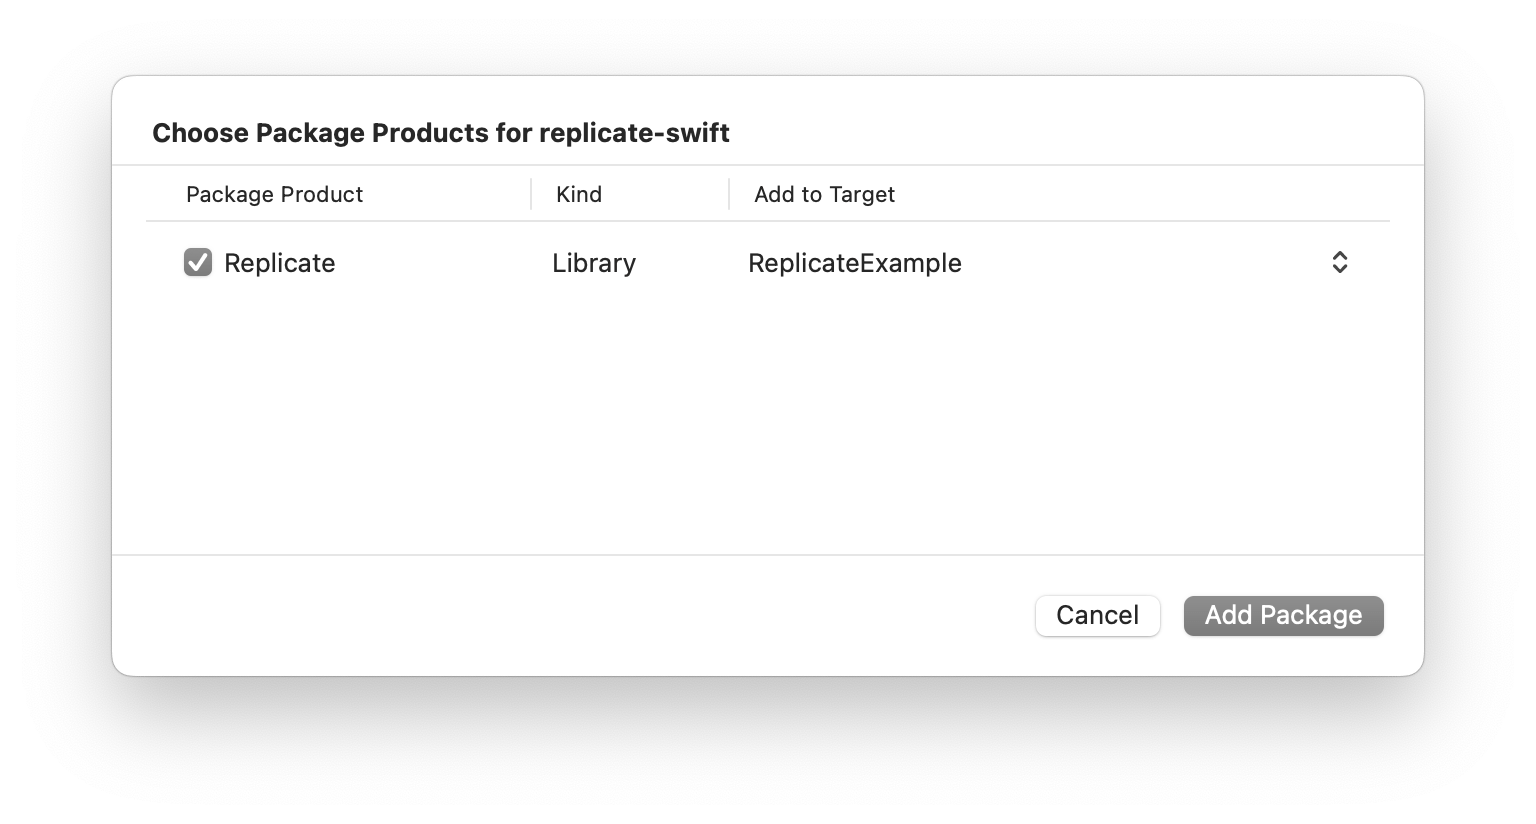 Choose Package Products for replicate-swift